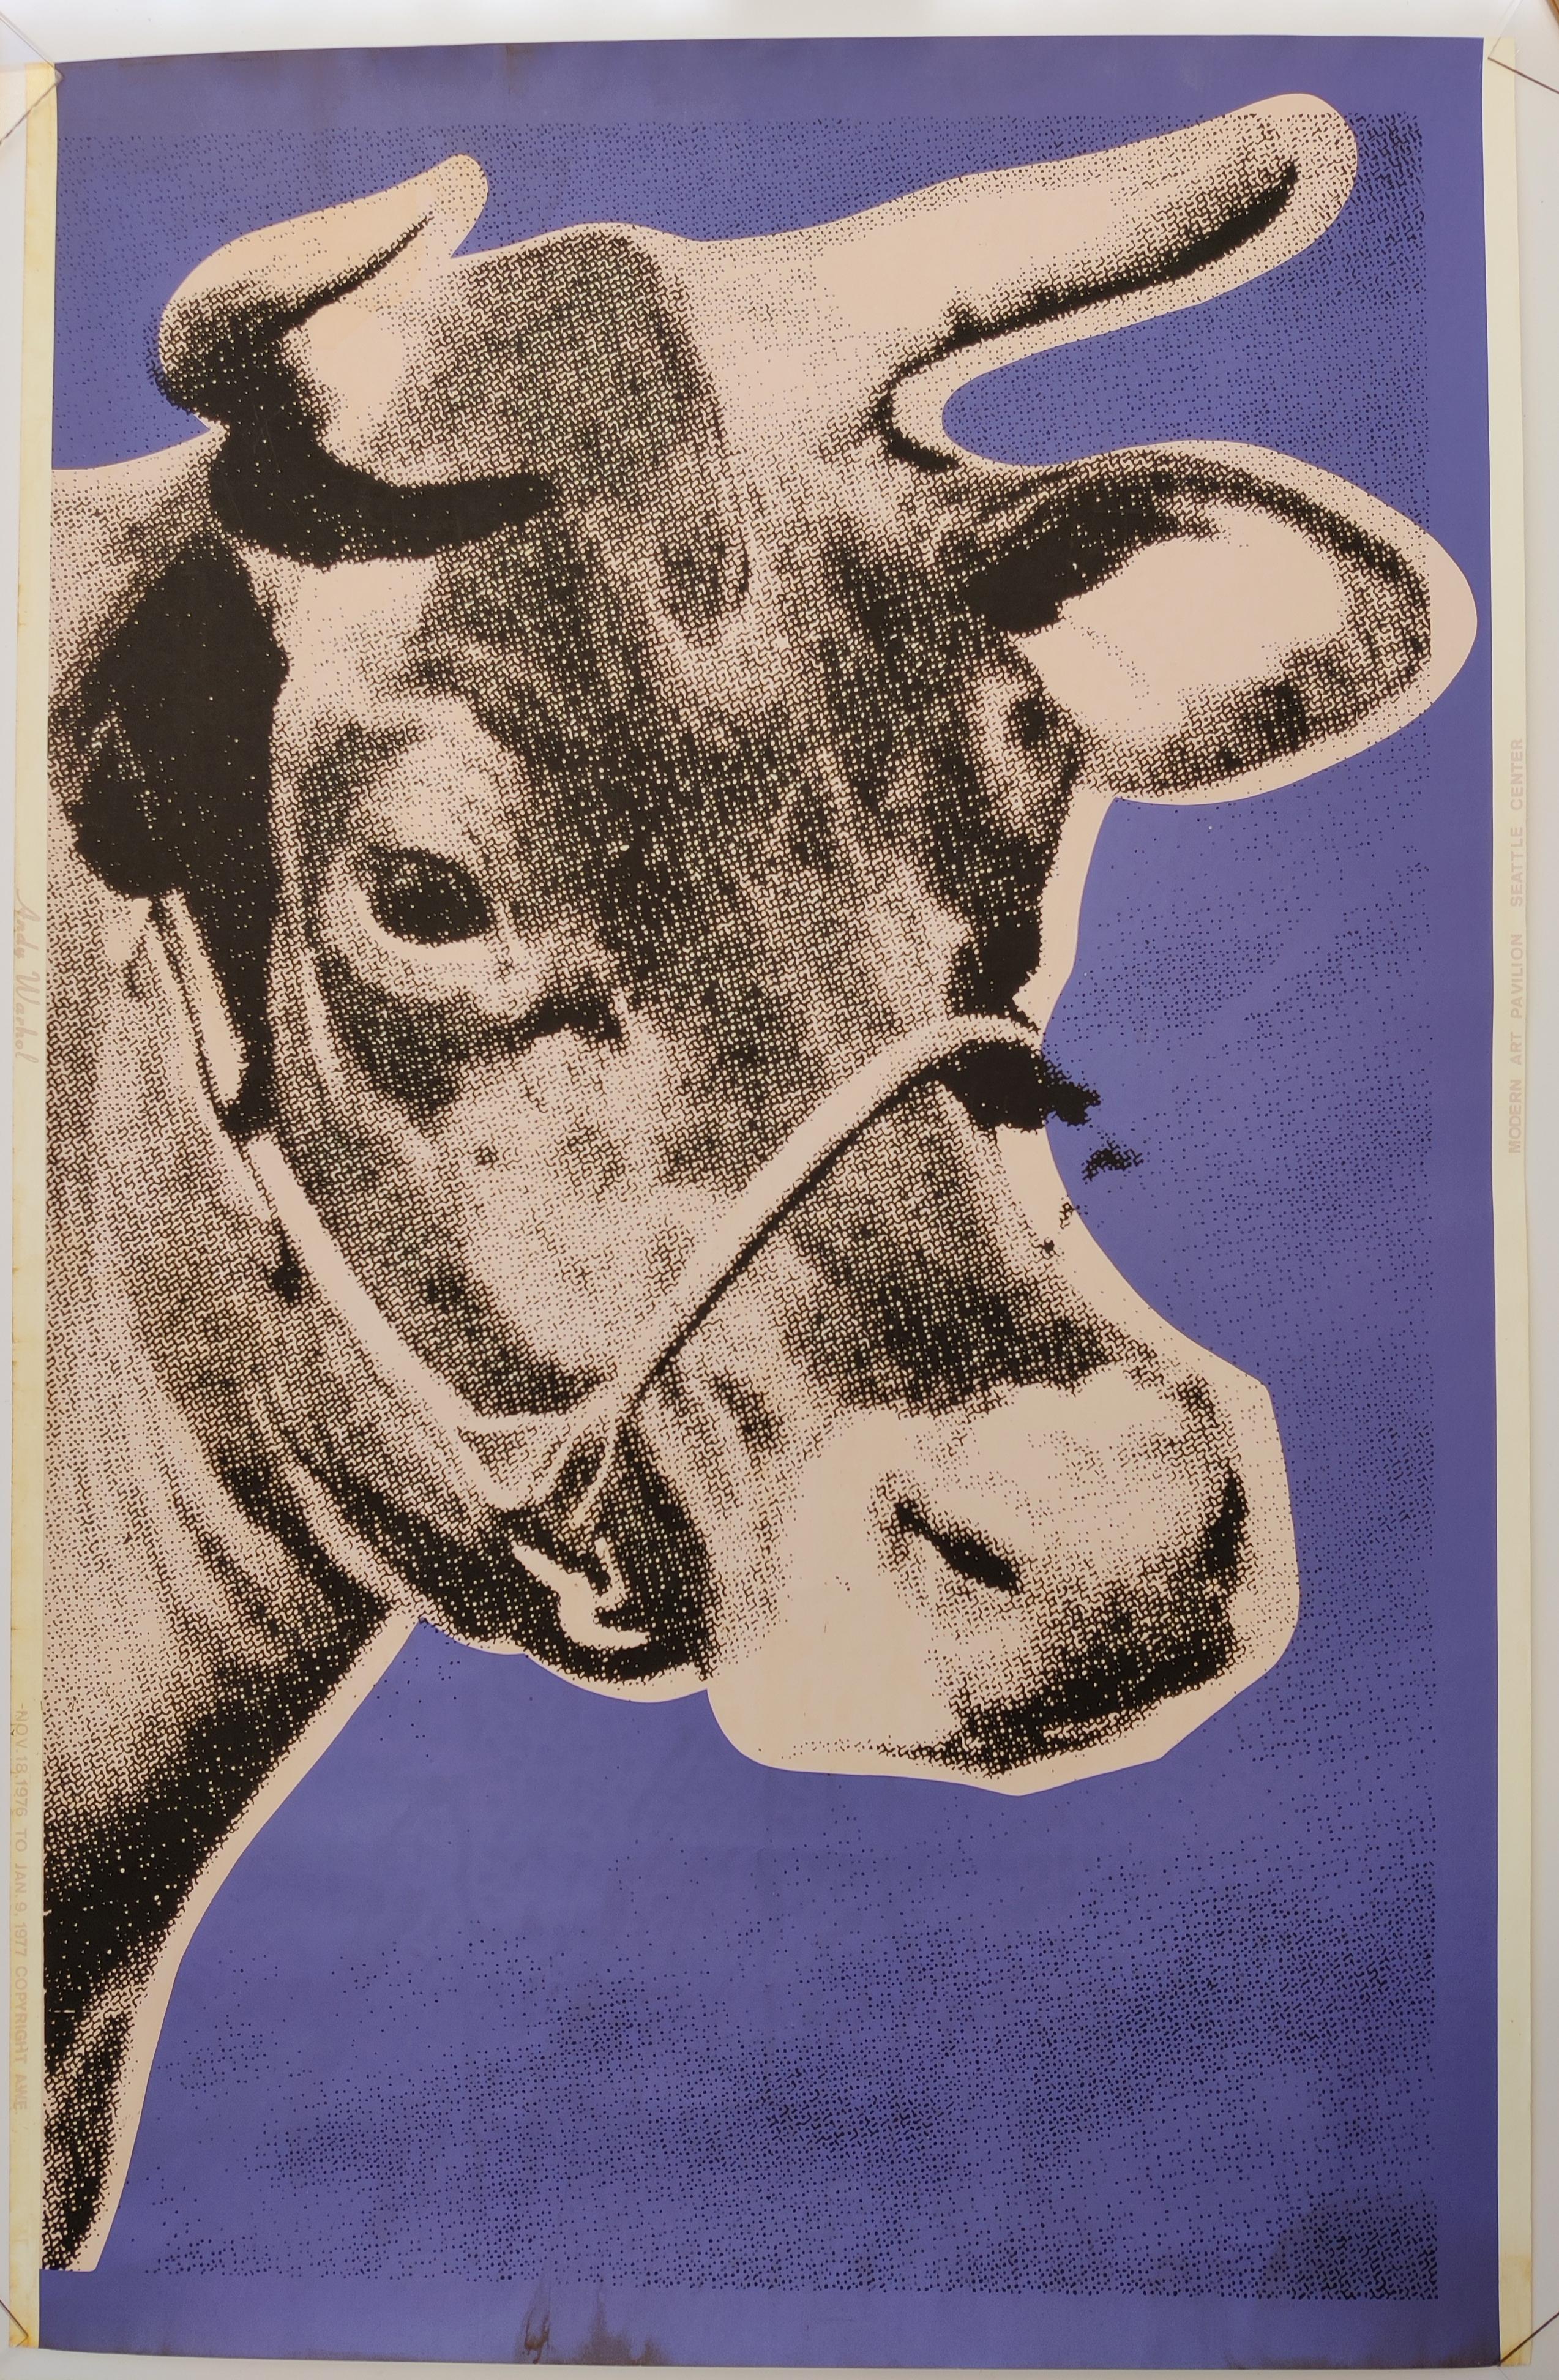 Andy Warhol 
Cow , 1971
Silkscreen on wallpaper, unsigned
Cow with a soft pink background, surrounded by a purple ground. 
Left margin in the same soft pink reading "Andy Warhol" and a bit further down "NOV. 18, 1976 TO JAN. 9, 1977 COPYRIGHT